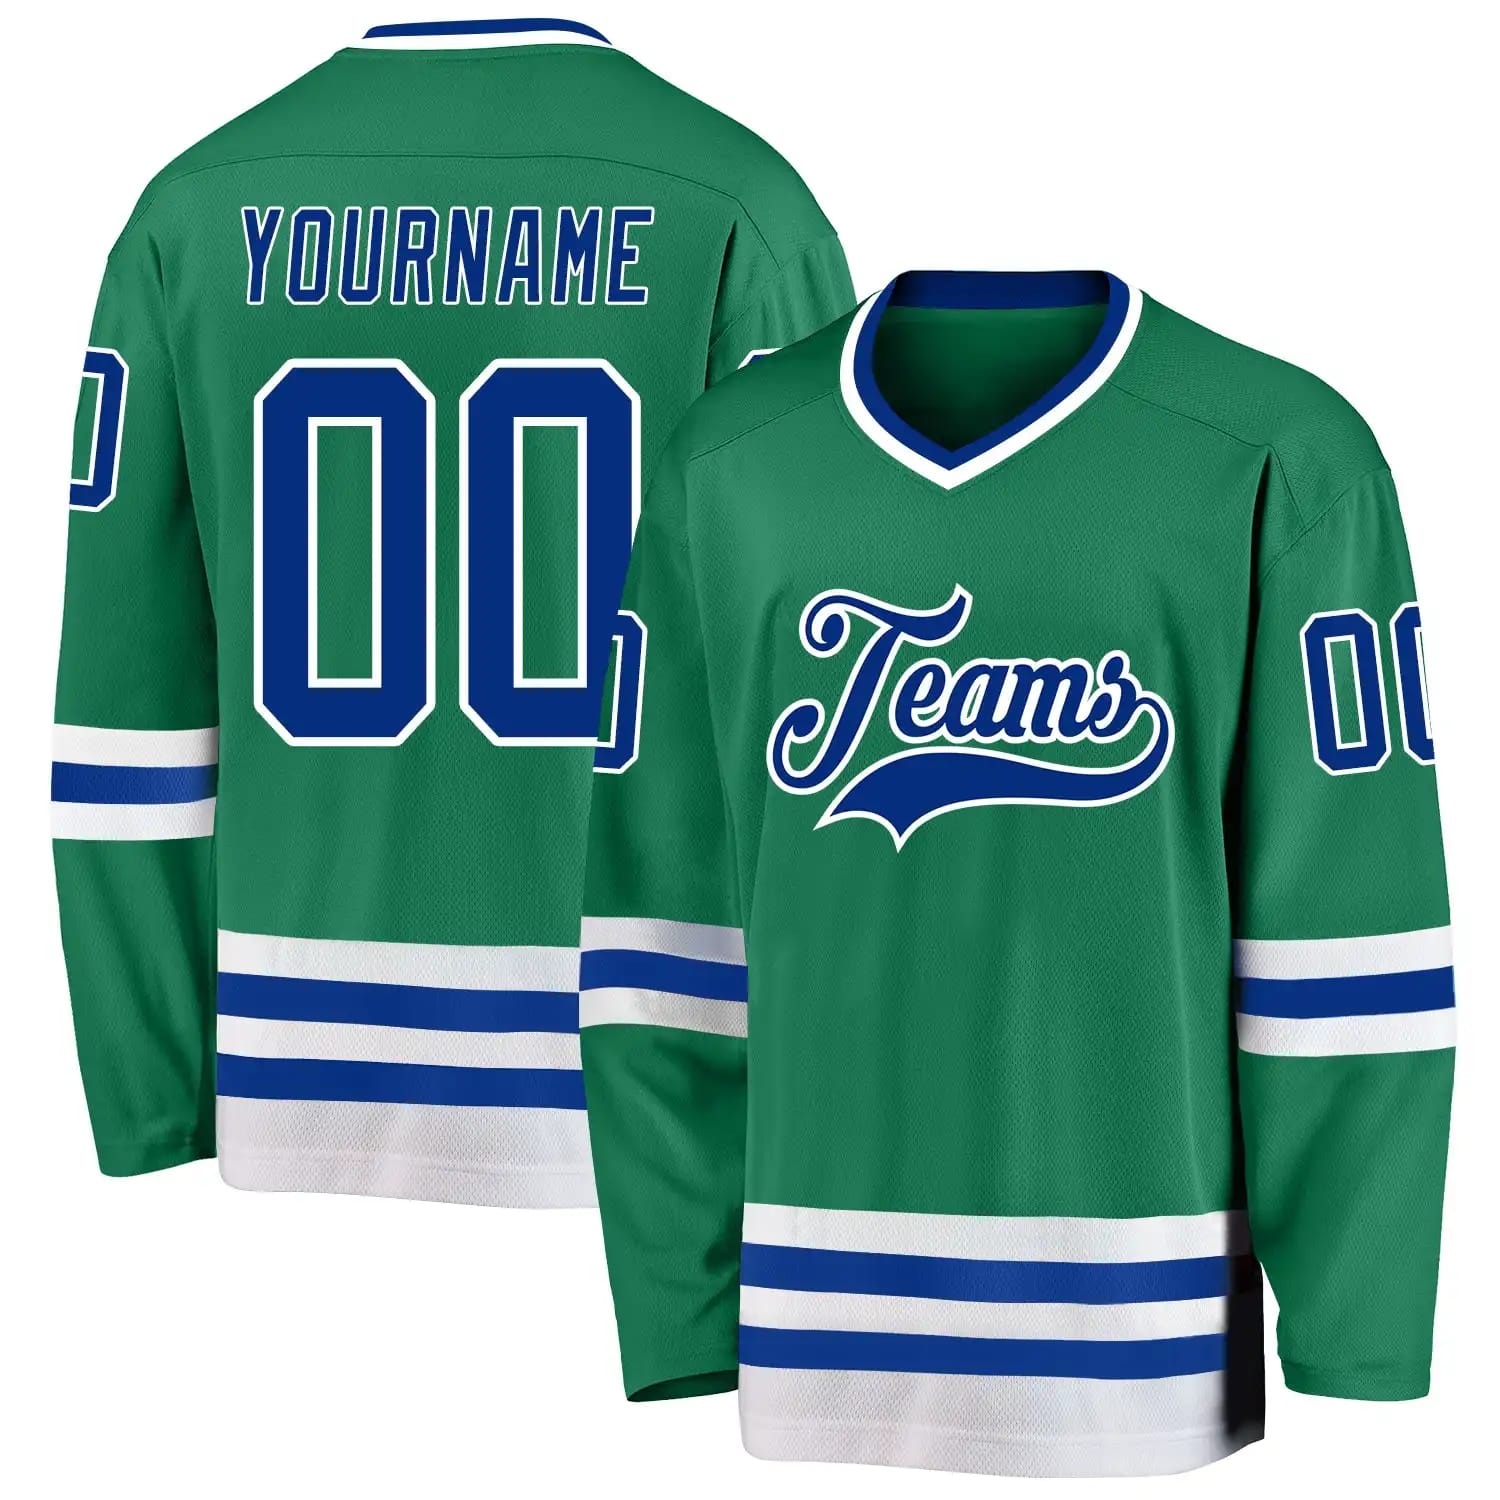 Stitched And Print Kelly Green Royal-White Hockey Jersey Custom